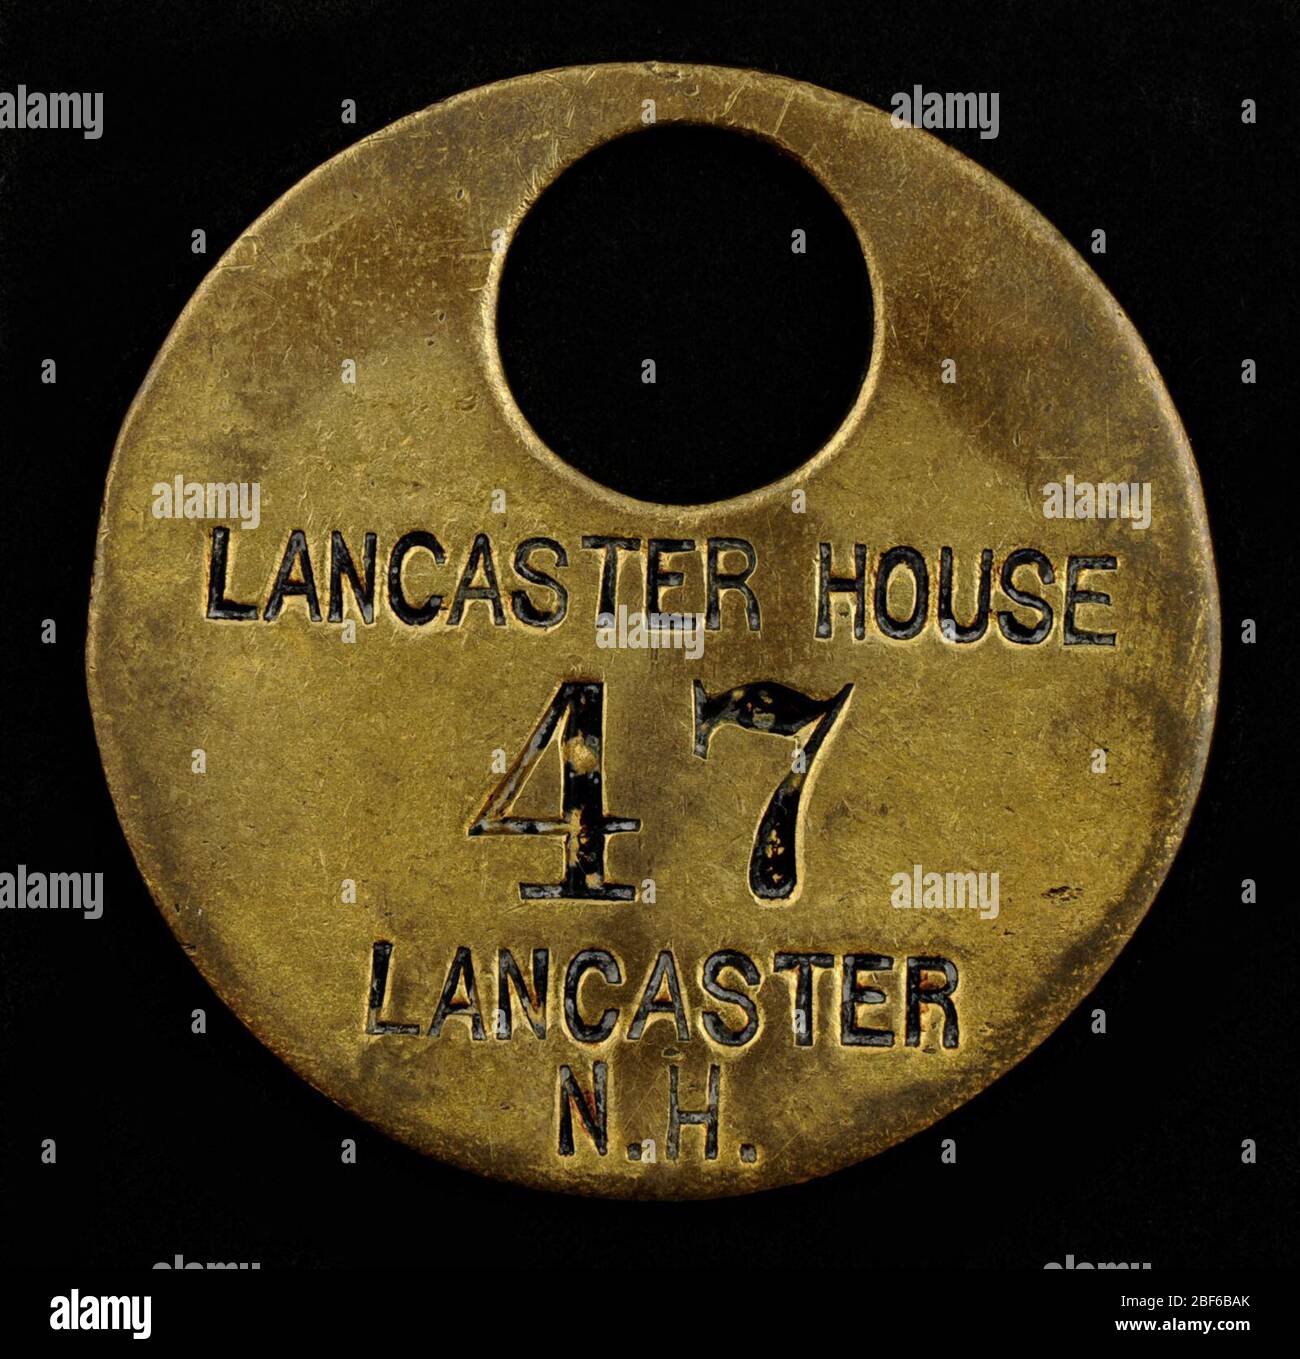 Lancaster House Owney tag. Owney received this tag when he visited the Lancaster House in Lancaster, New Hampshire, on May 5, 1896. There is no available information to indicate when this tag was presented to Owney. Stock Photo